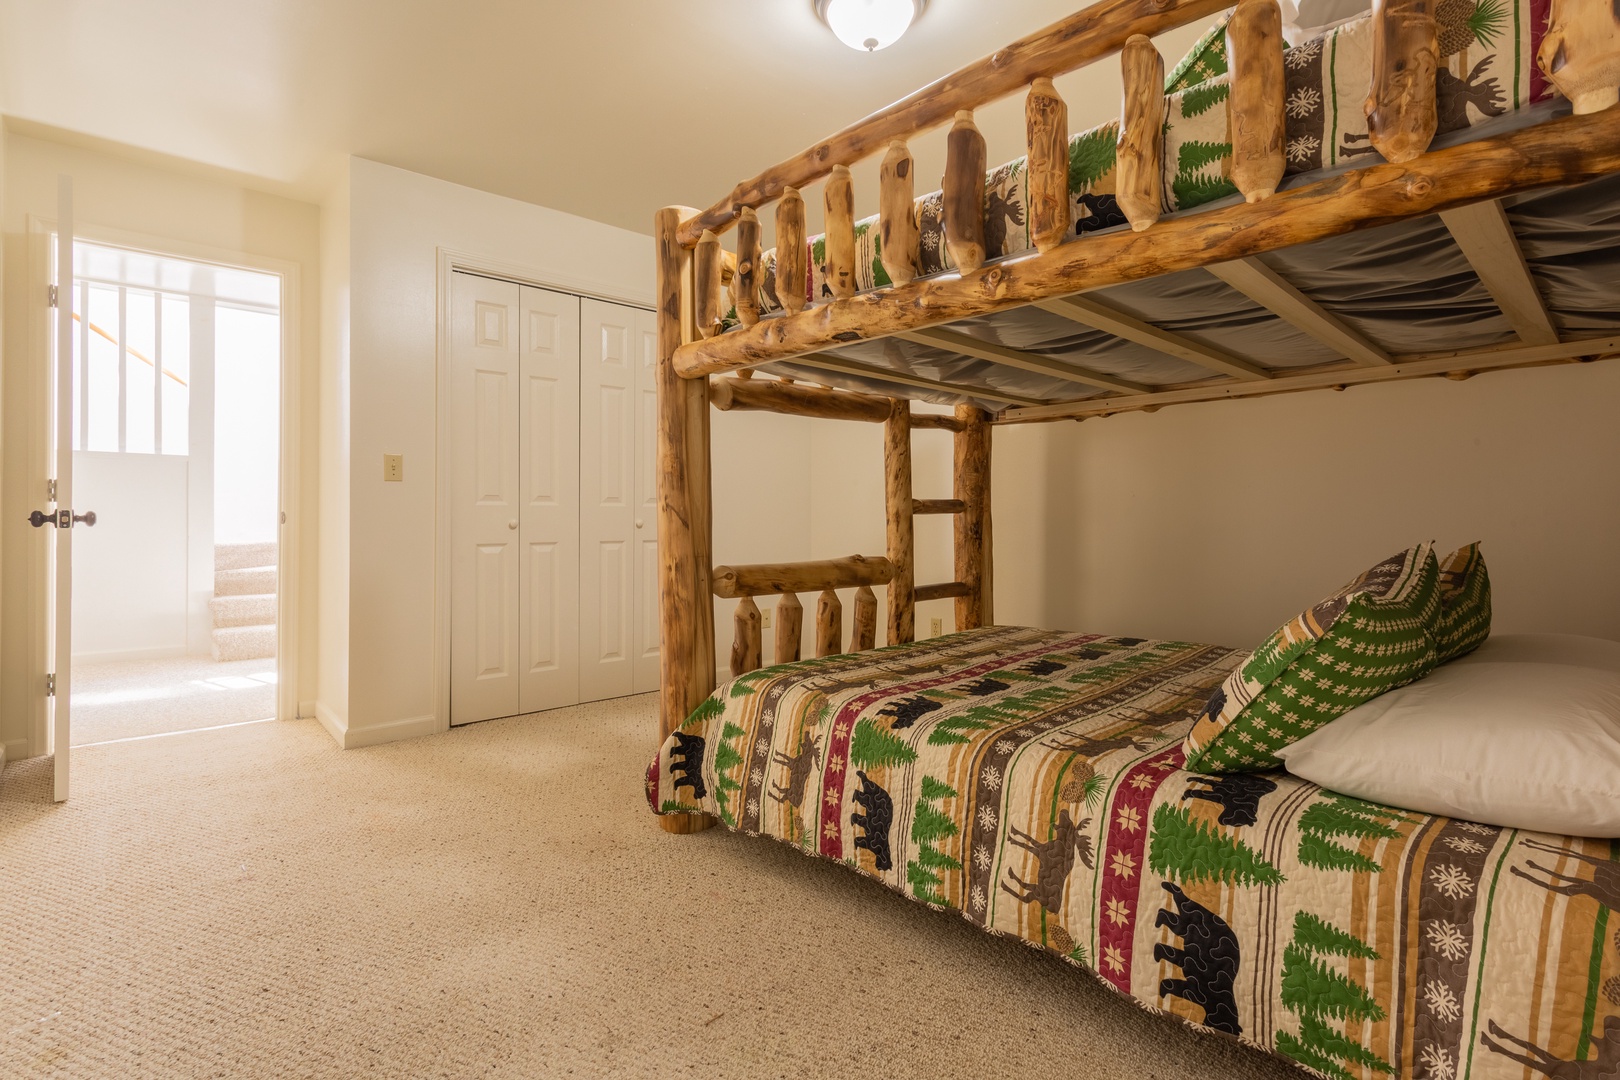 Bunkbeds at 1 Crazy Cub, a 4 bedroom cabin rental located in Pigeon Forge